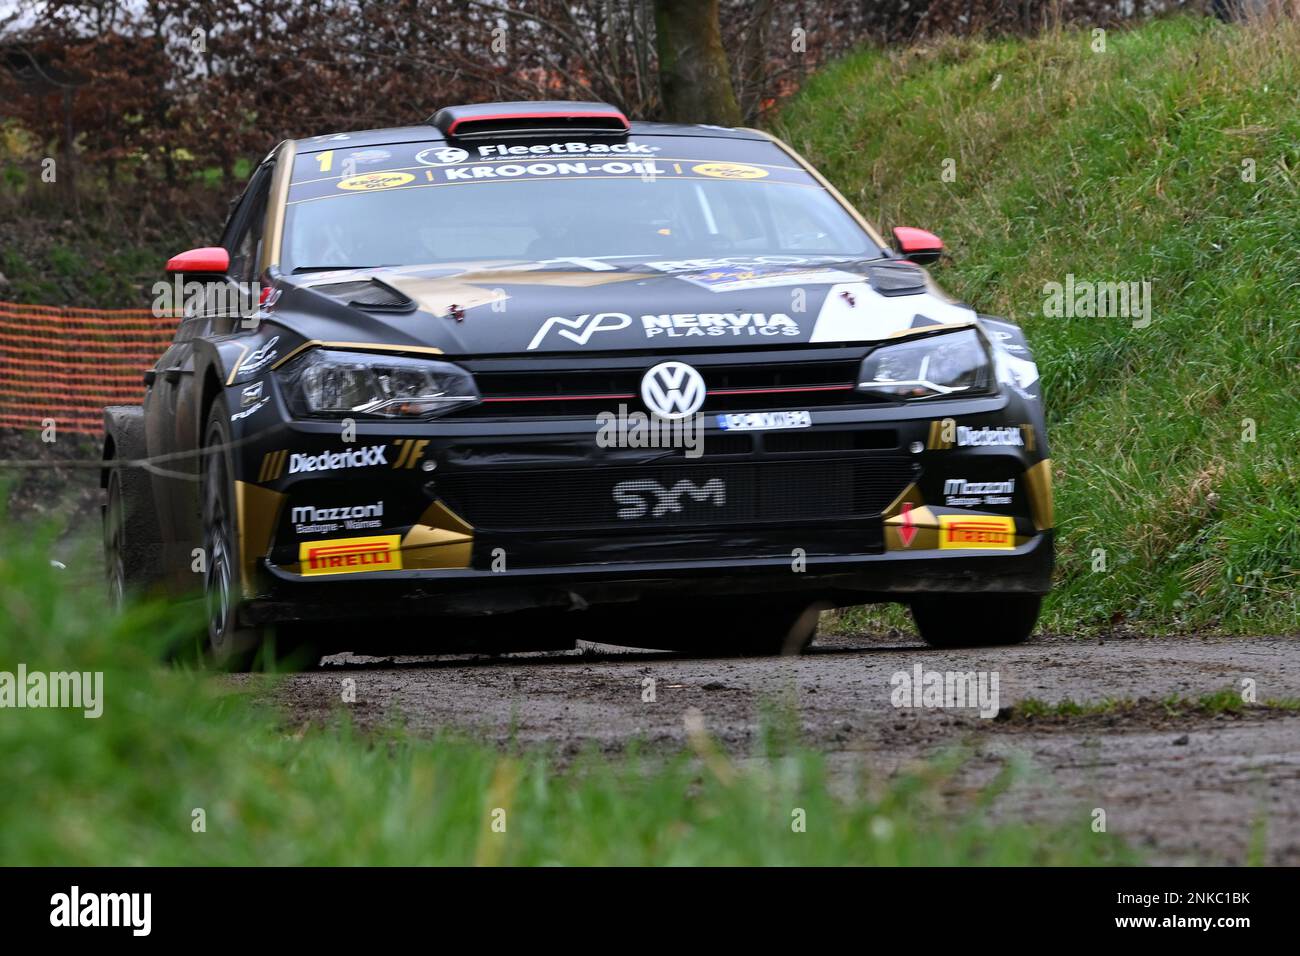 Sint-Truiden, Belgium, 23/02/2023, Belgian Gino Bux and Anthony Bourdeaud'hui in their Volkswagen Polo of team Ebrt pictured during the Shakedown test ride before this weekend's Haspengouw Rally event, Thursday 23 February 2023 in Sint-Truiden, the first stage of the Belgian Rally Championship. BELGA PHOTO LUC CLAESSEN Stock Photo